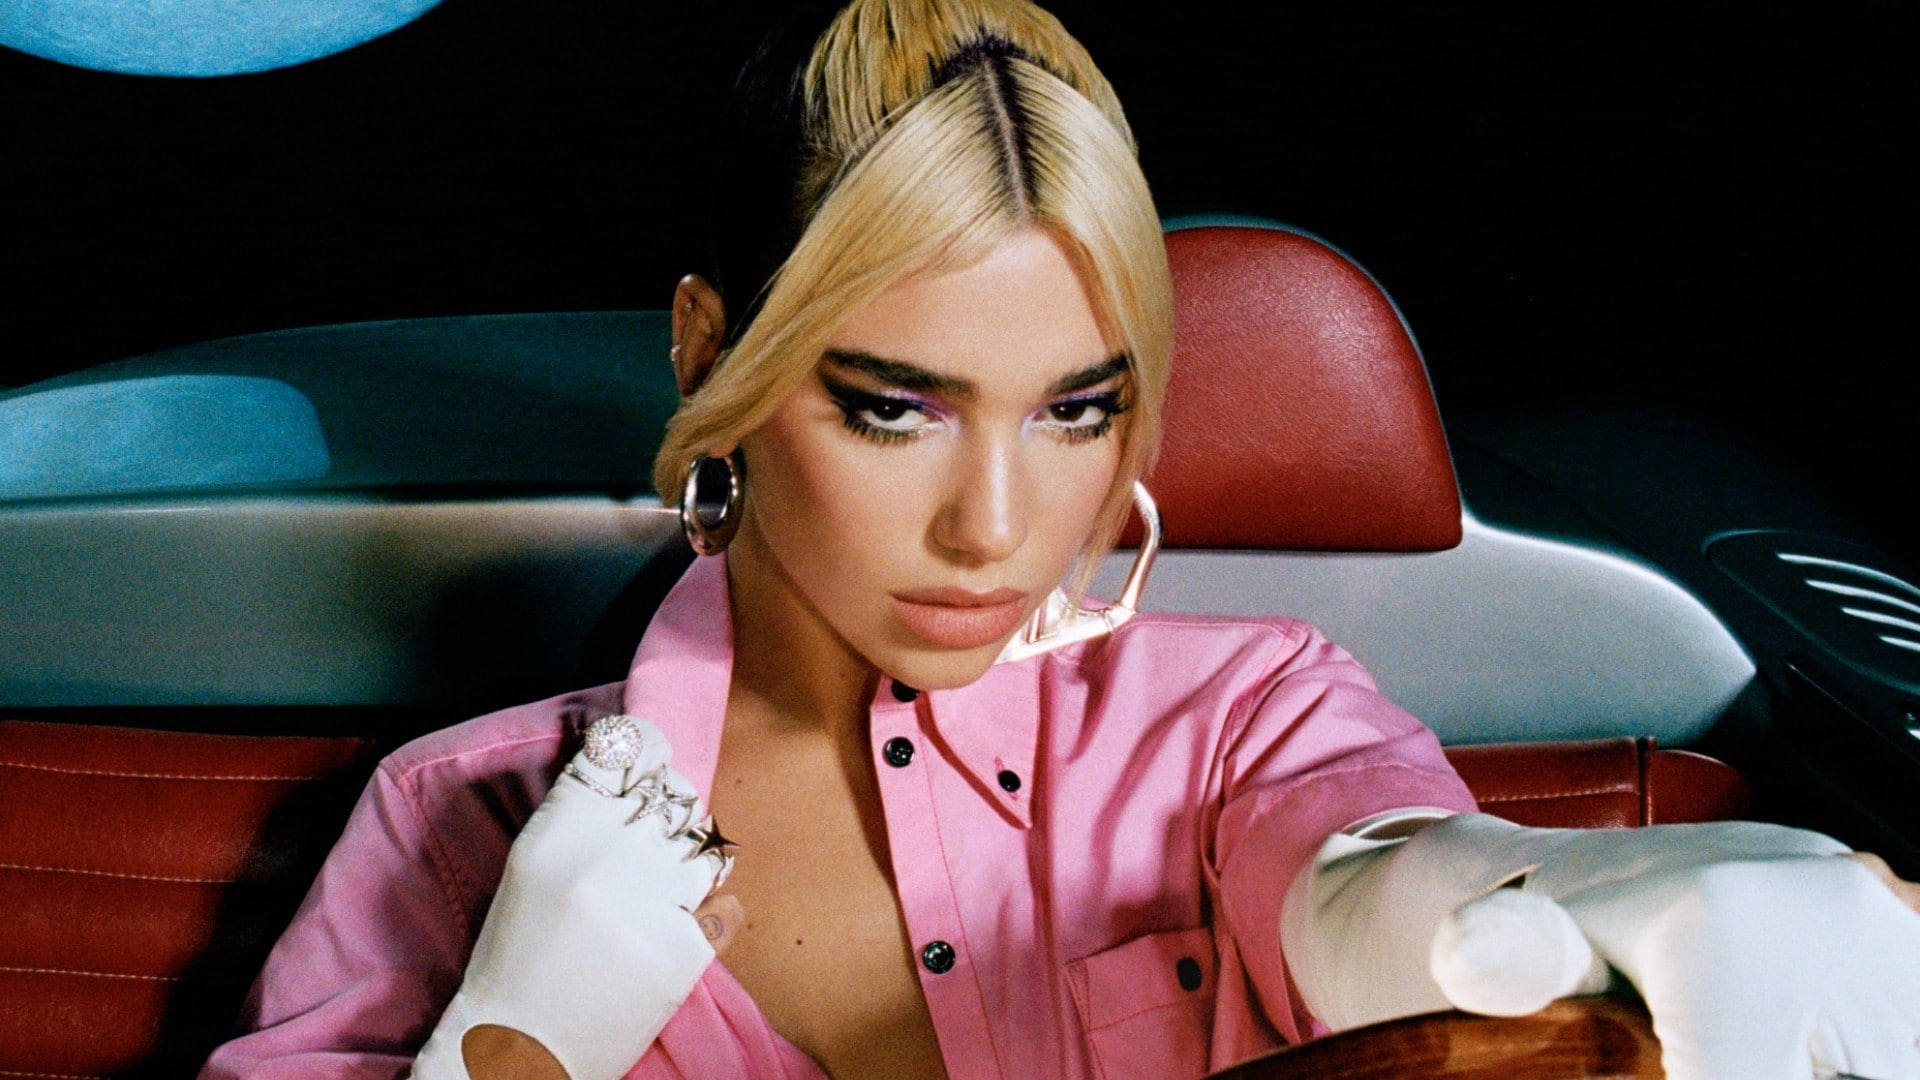 Dua Lipa 'shocked and appalled' by DaBaby's homophobic remarks